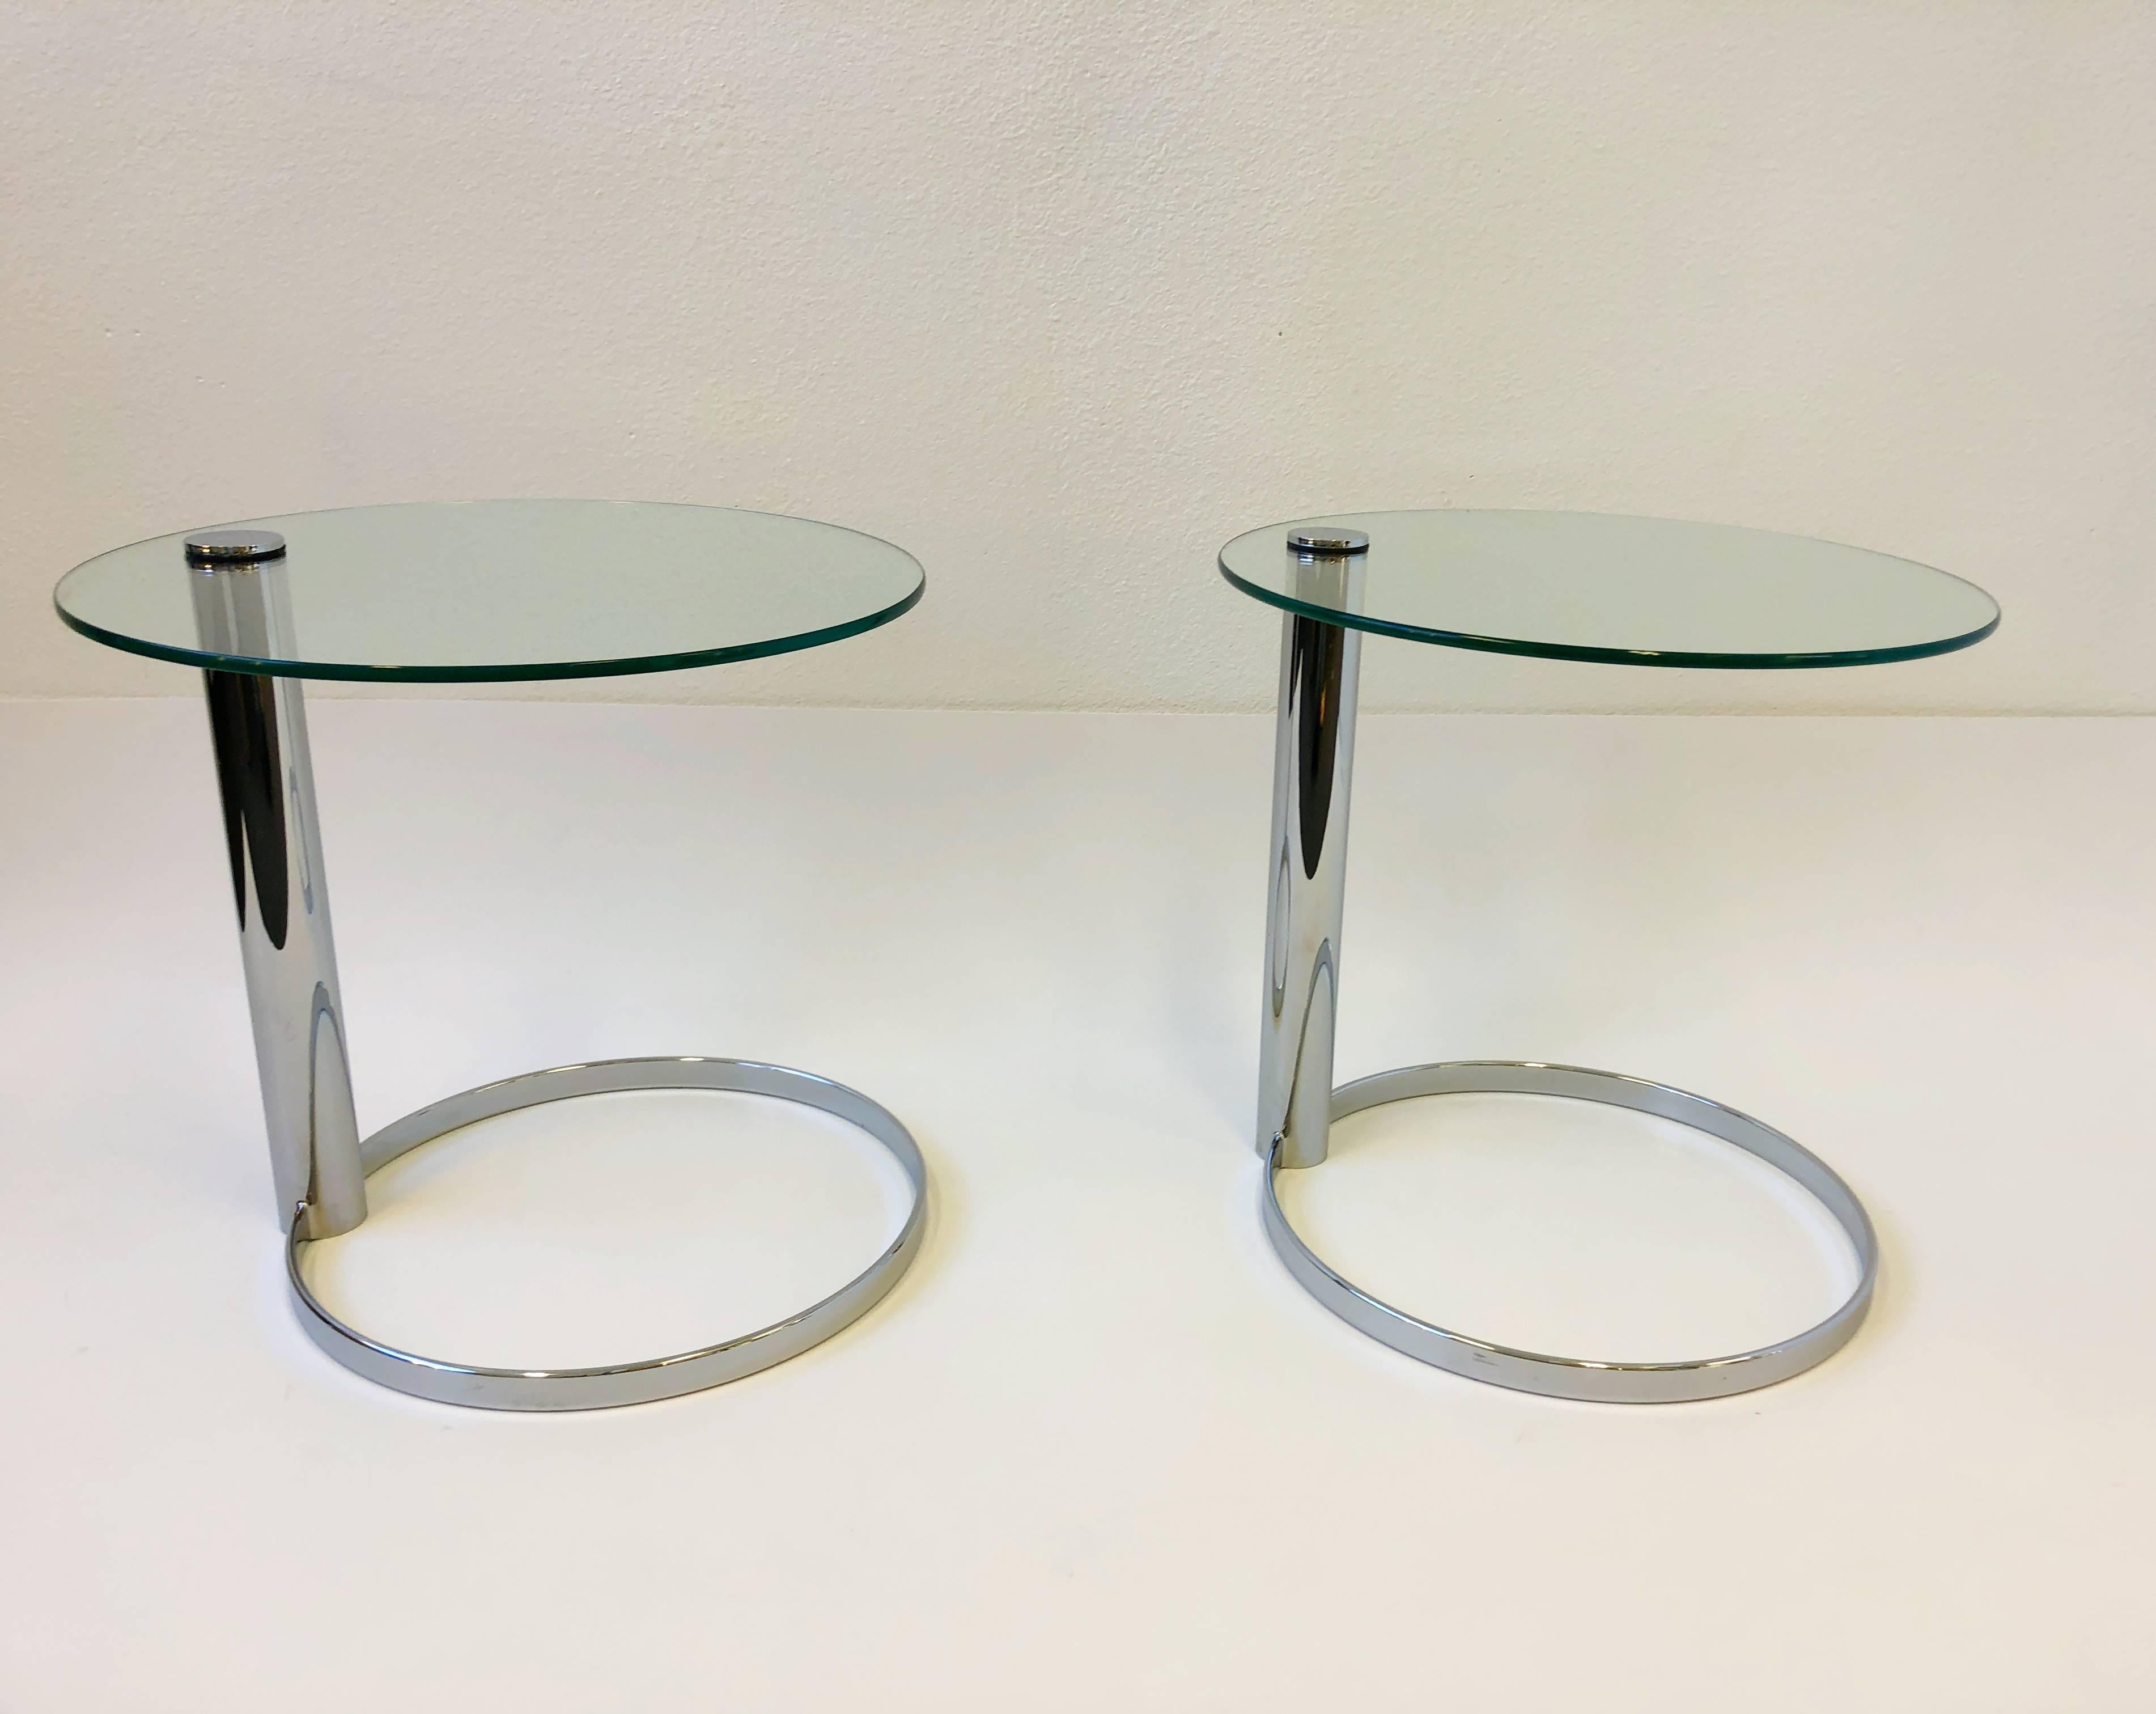 A amazing pair of polish chrome and glass side tables by John Mascheroni for Swaim. New glass tops. Dimension: 22” diameter, 21” high.  
 